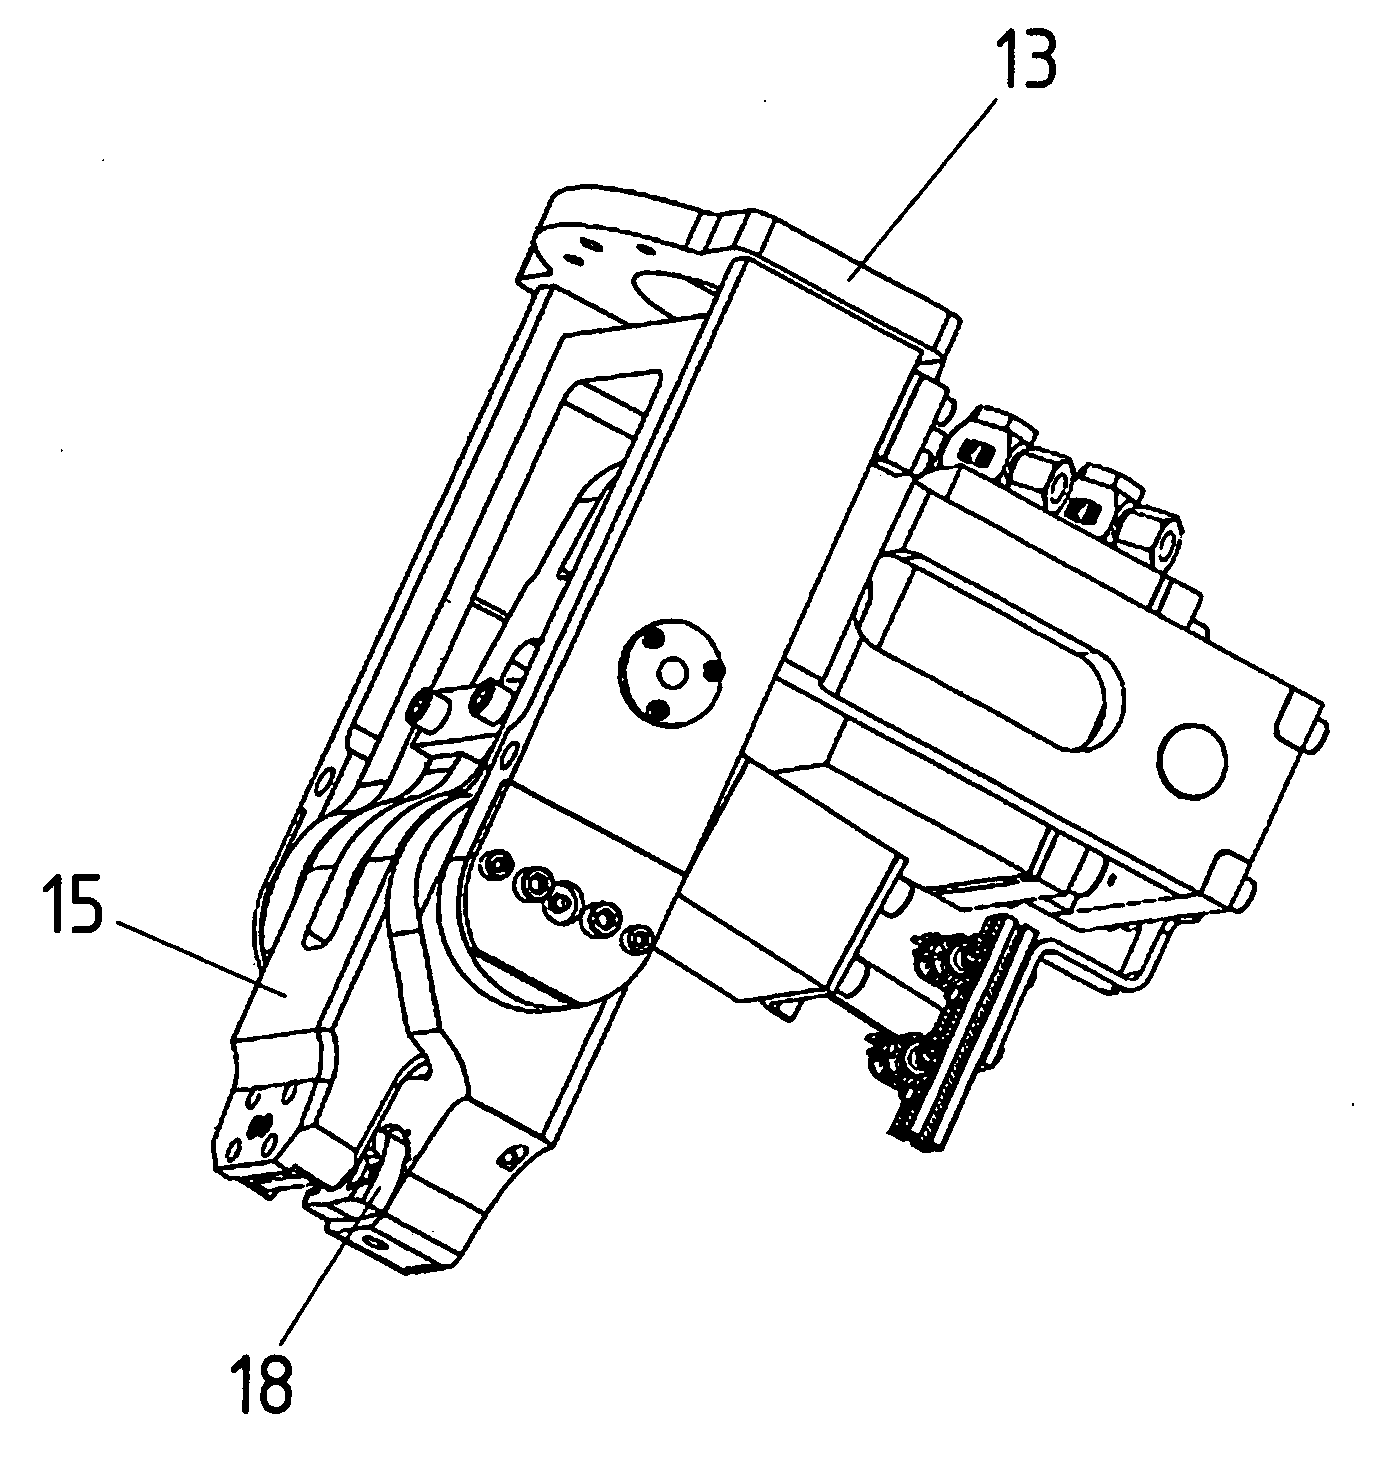 Apparatus and method of perforating a component